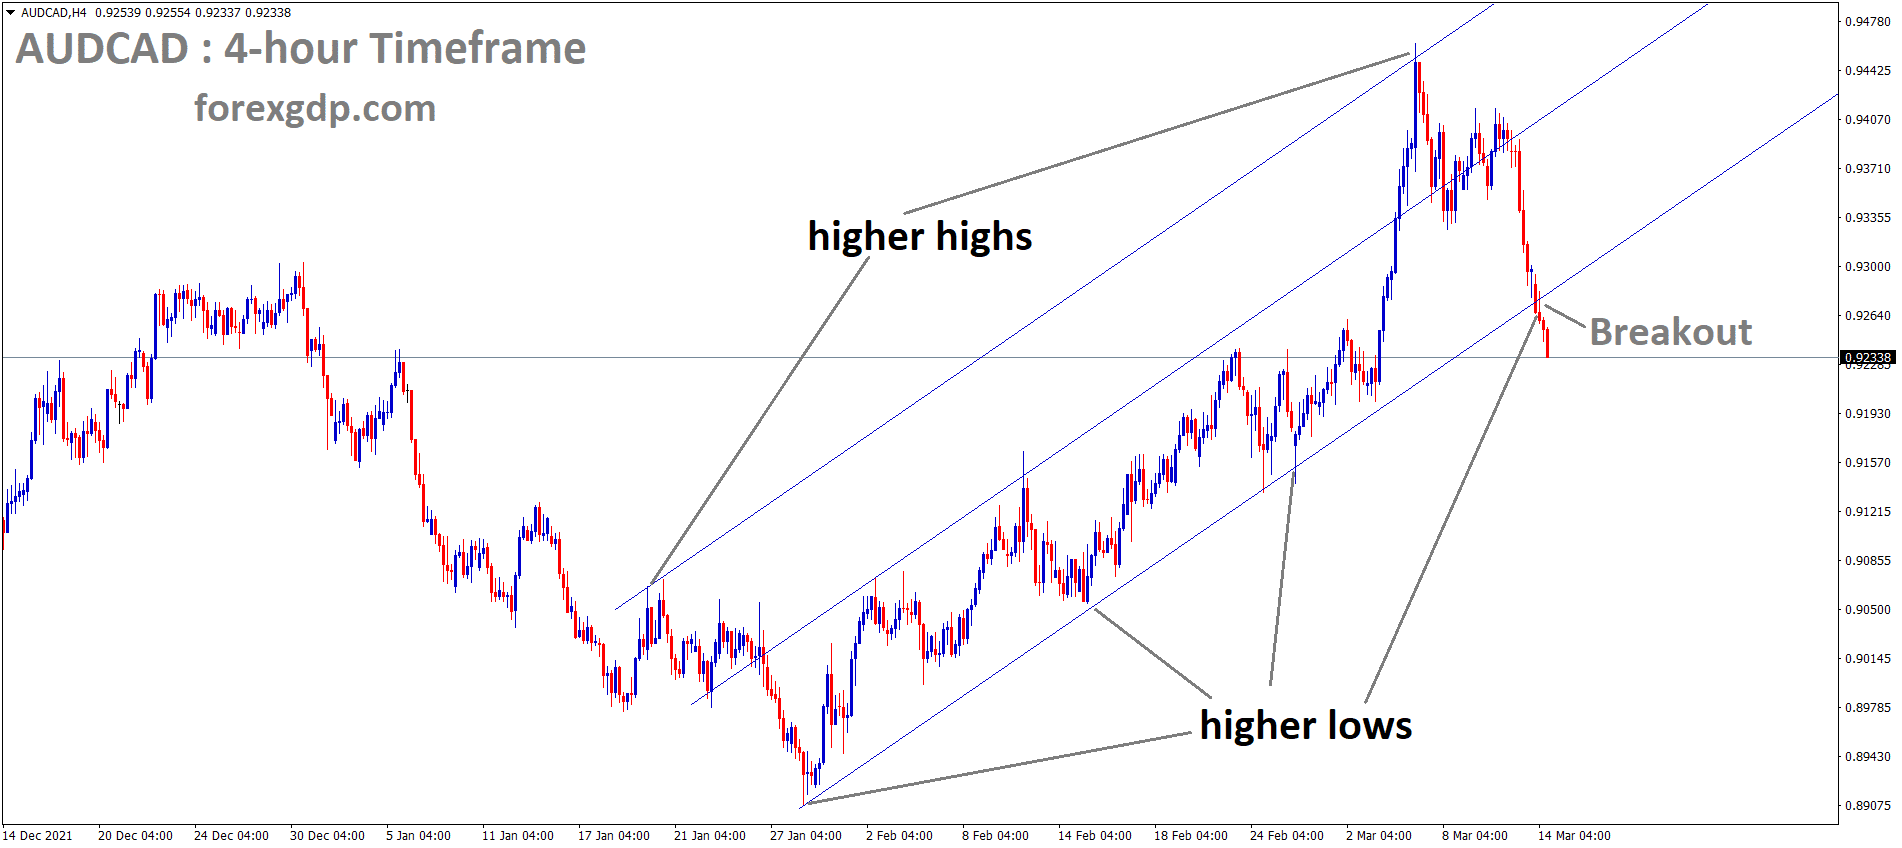 AUDCAD is moving in an ascending channel and reaching the higher low area of the Ascending channel.